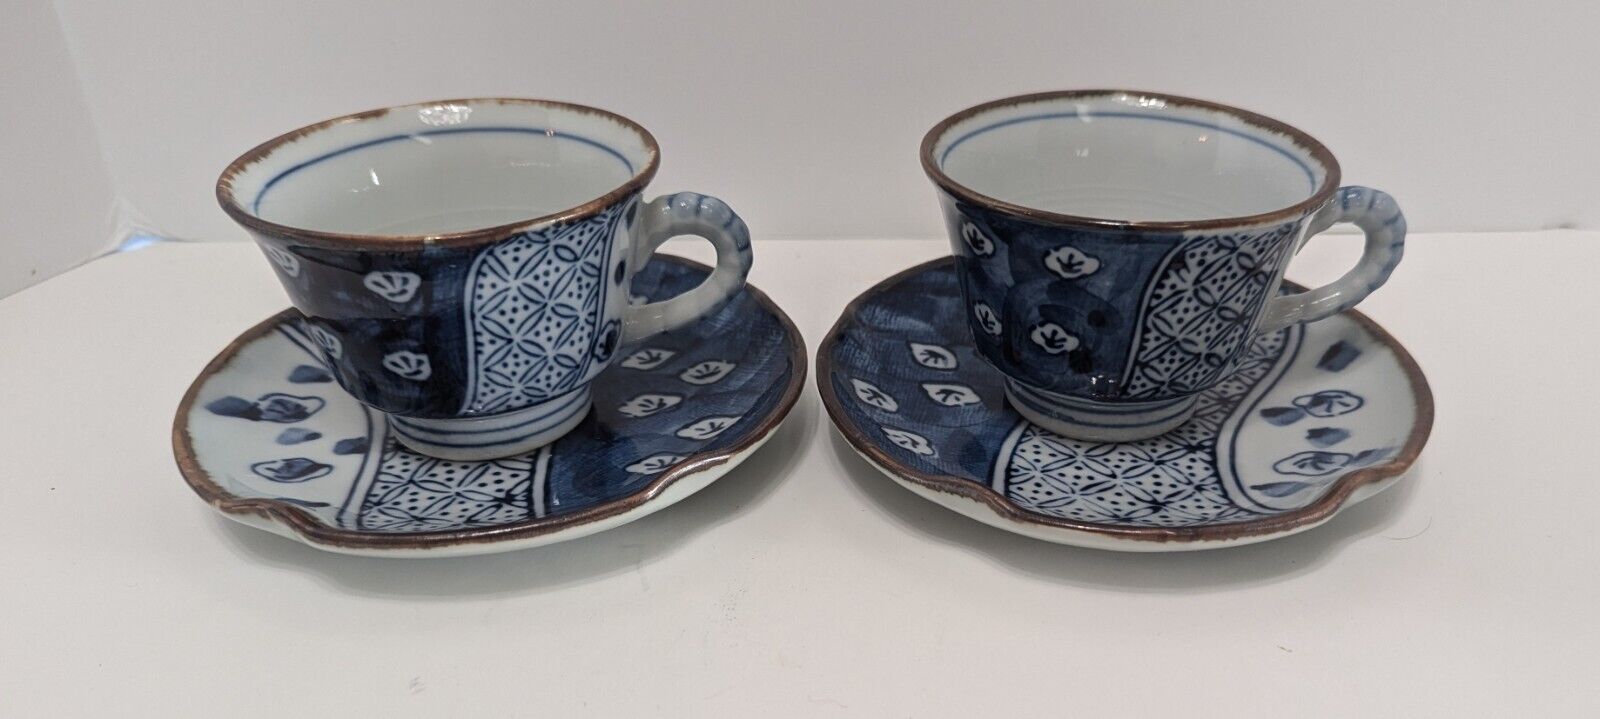 Pair of Vintage Japanese Arita Ware Blue and White Tea Cups and Saucers